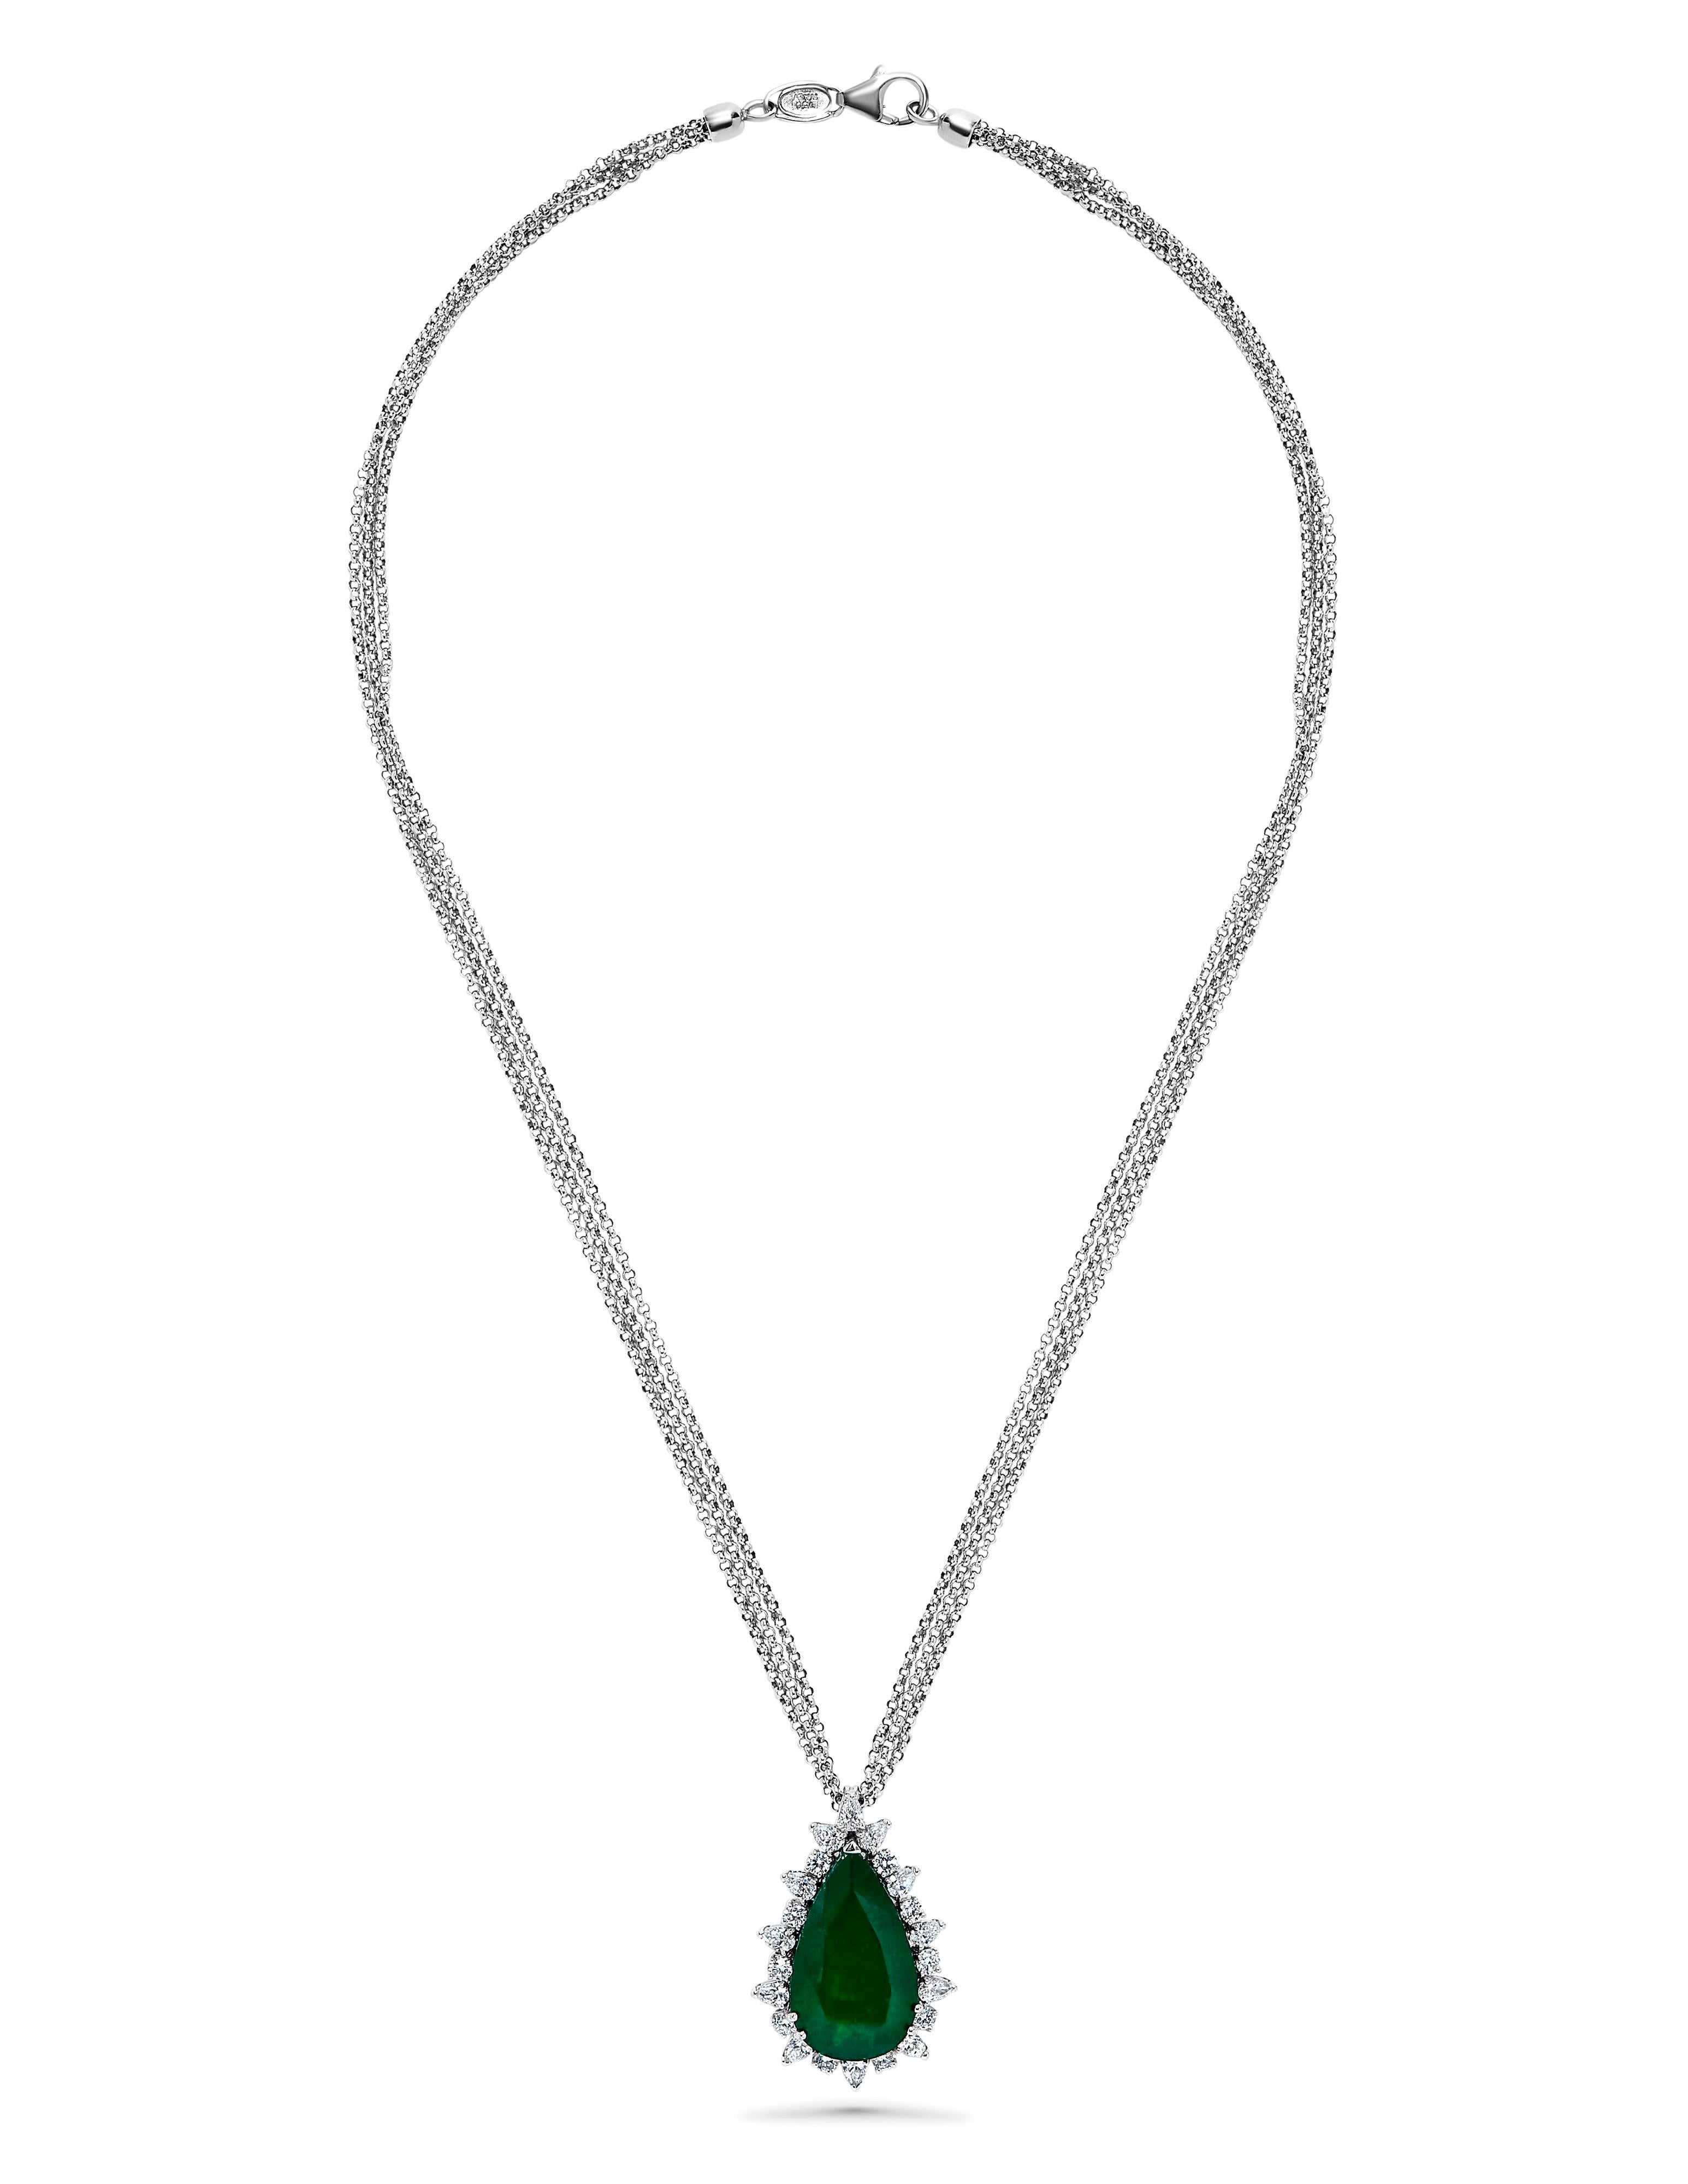 From The Vault At Emilio Jewelry New York,
A magical necklace featuring the best of the best certified vivid green Colombian emerald exceptionally clean and transparent.
1 emerald 12.32cts certified as minor Colombian. 
10 round diamonds .65